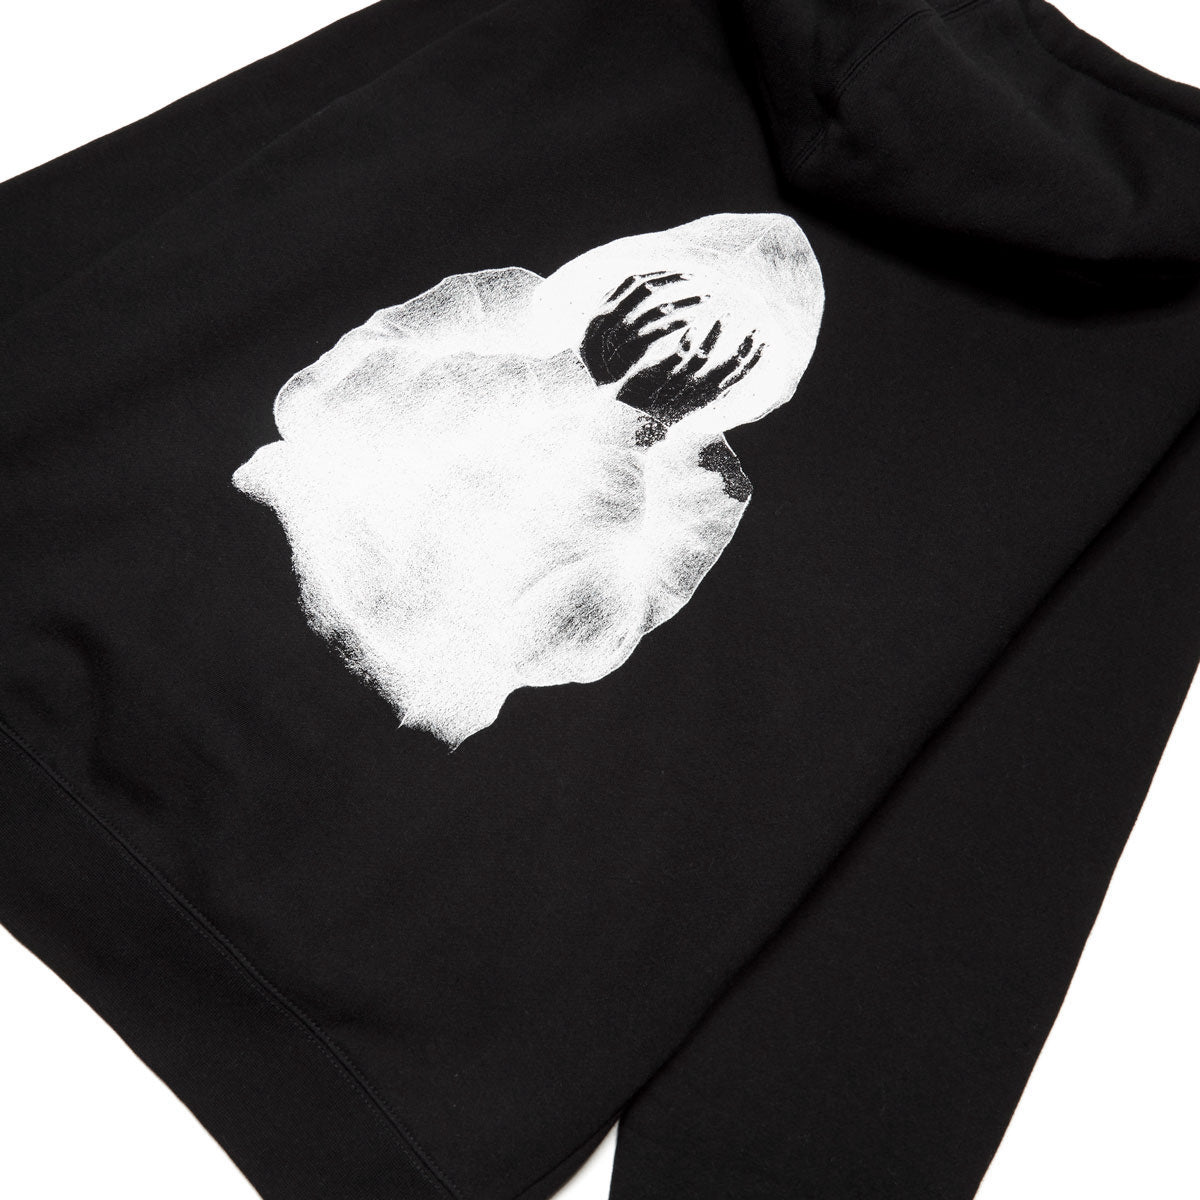 CCS Smile on the Surface Zip Hoodie - Black/White image 3